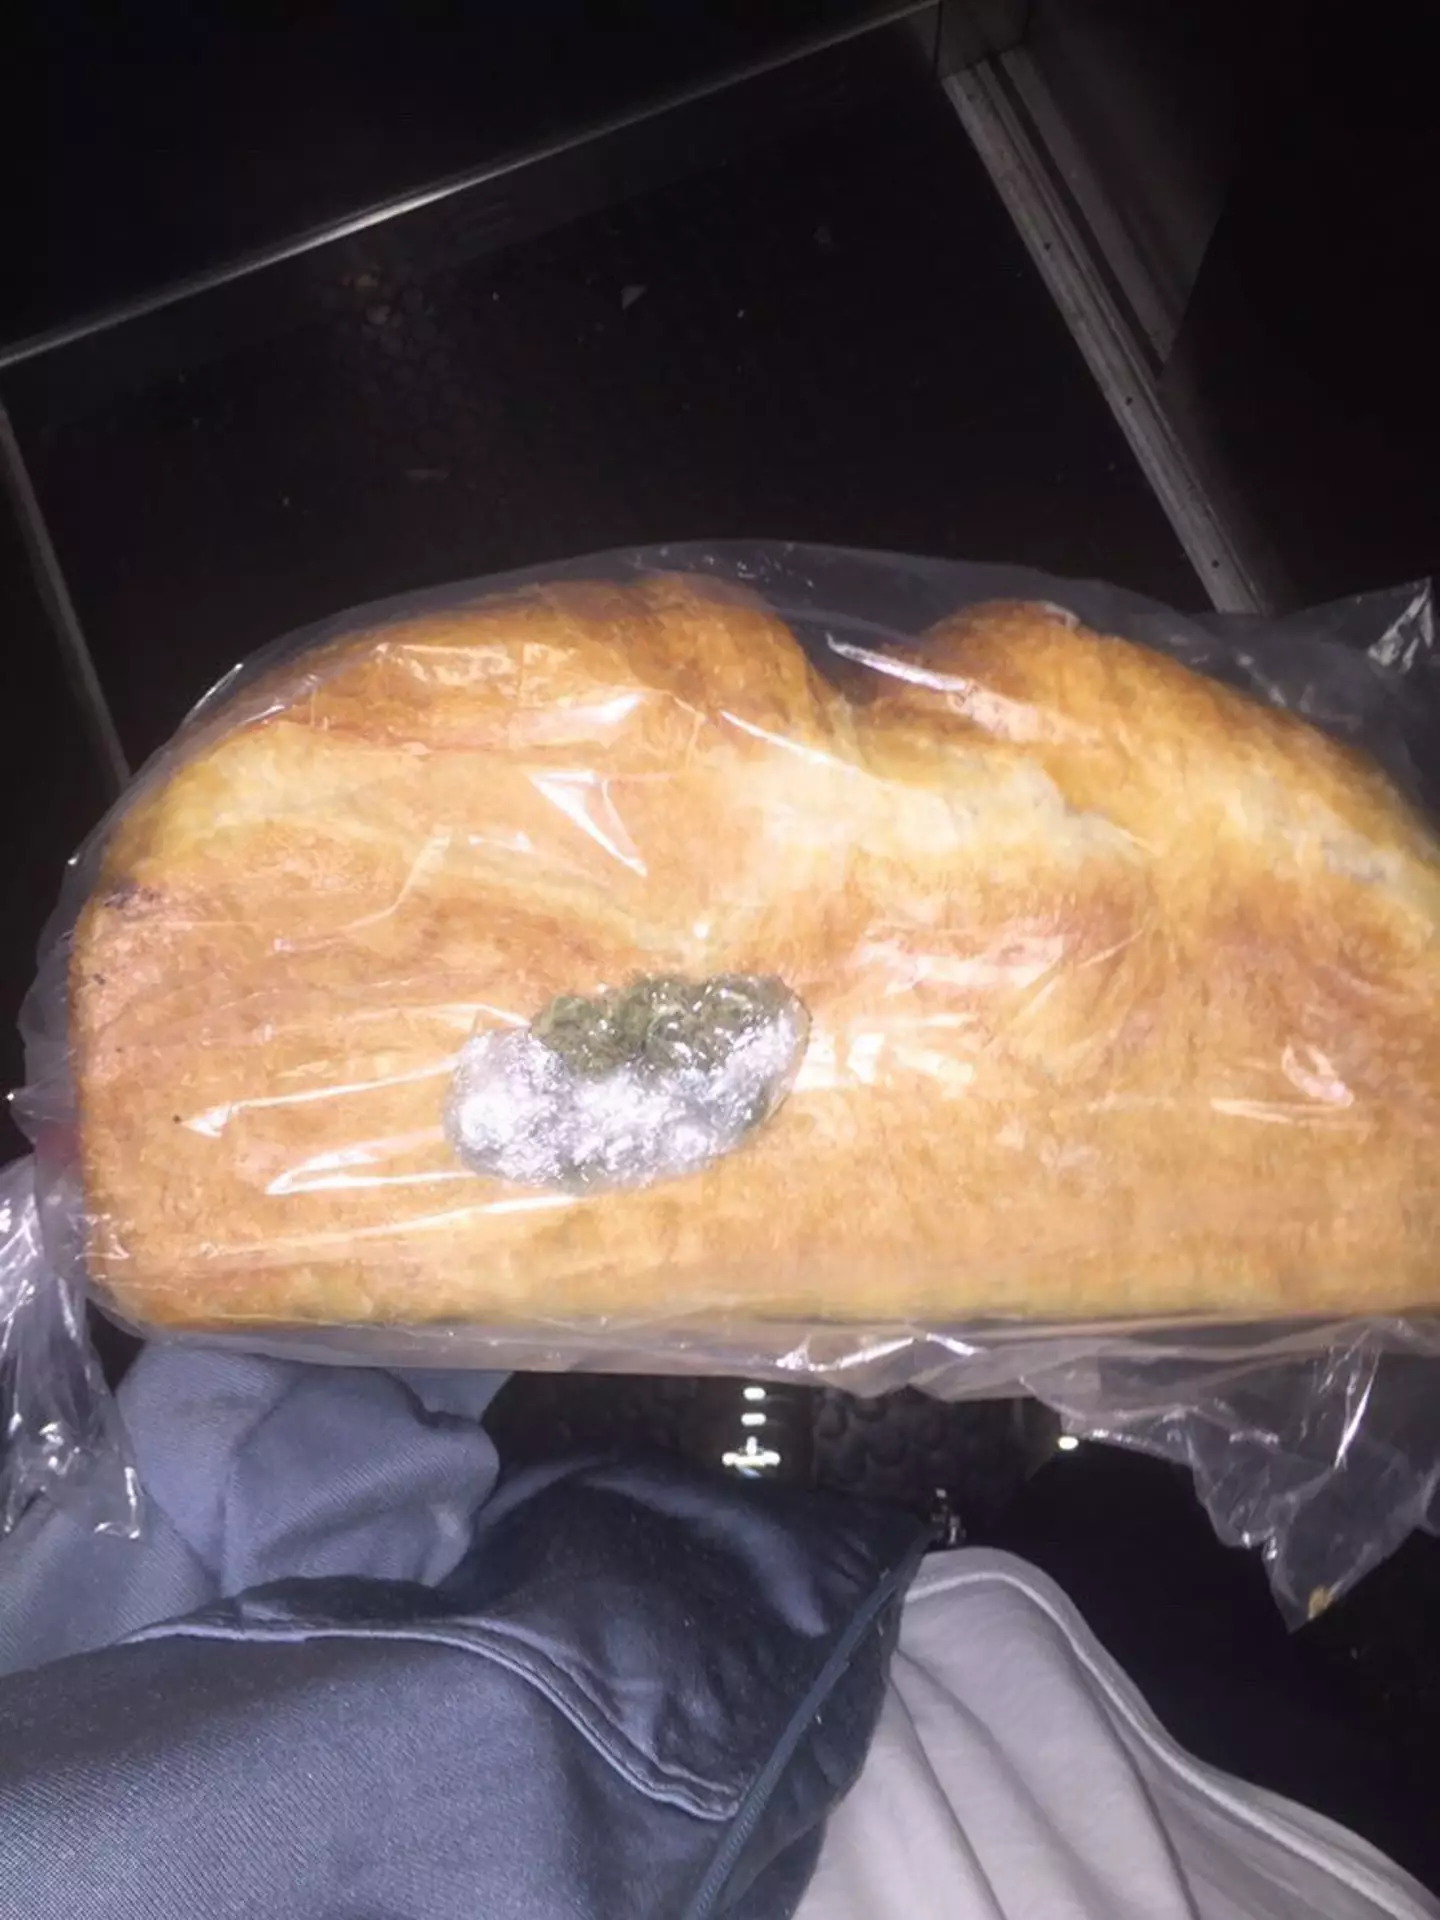 The weed arrived along with the bread.